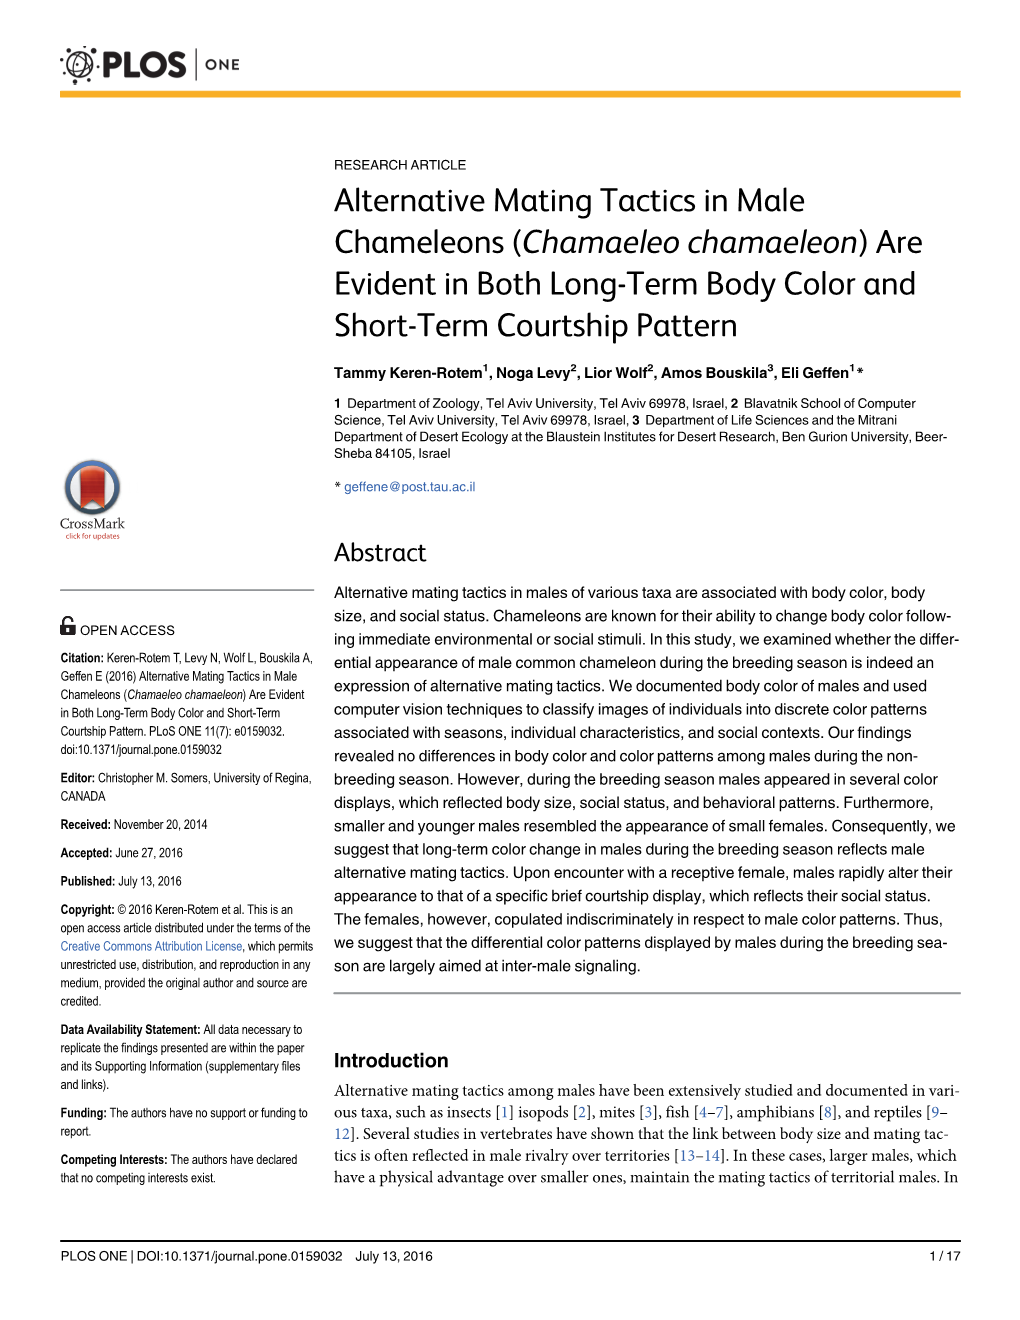 Alternative Mating Tactics in Male Chameleons (Chamaeleo Chamaeleon) Are Evident in Both Long-Term Body Color and Short-Term Courtship Pattern